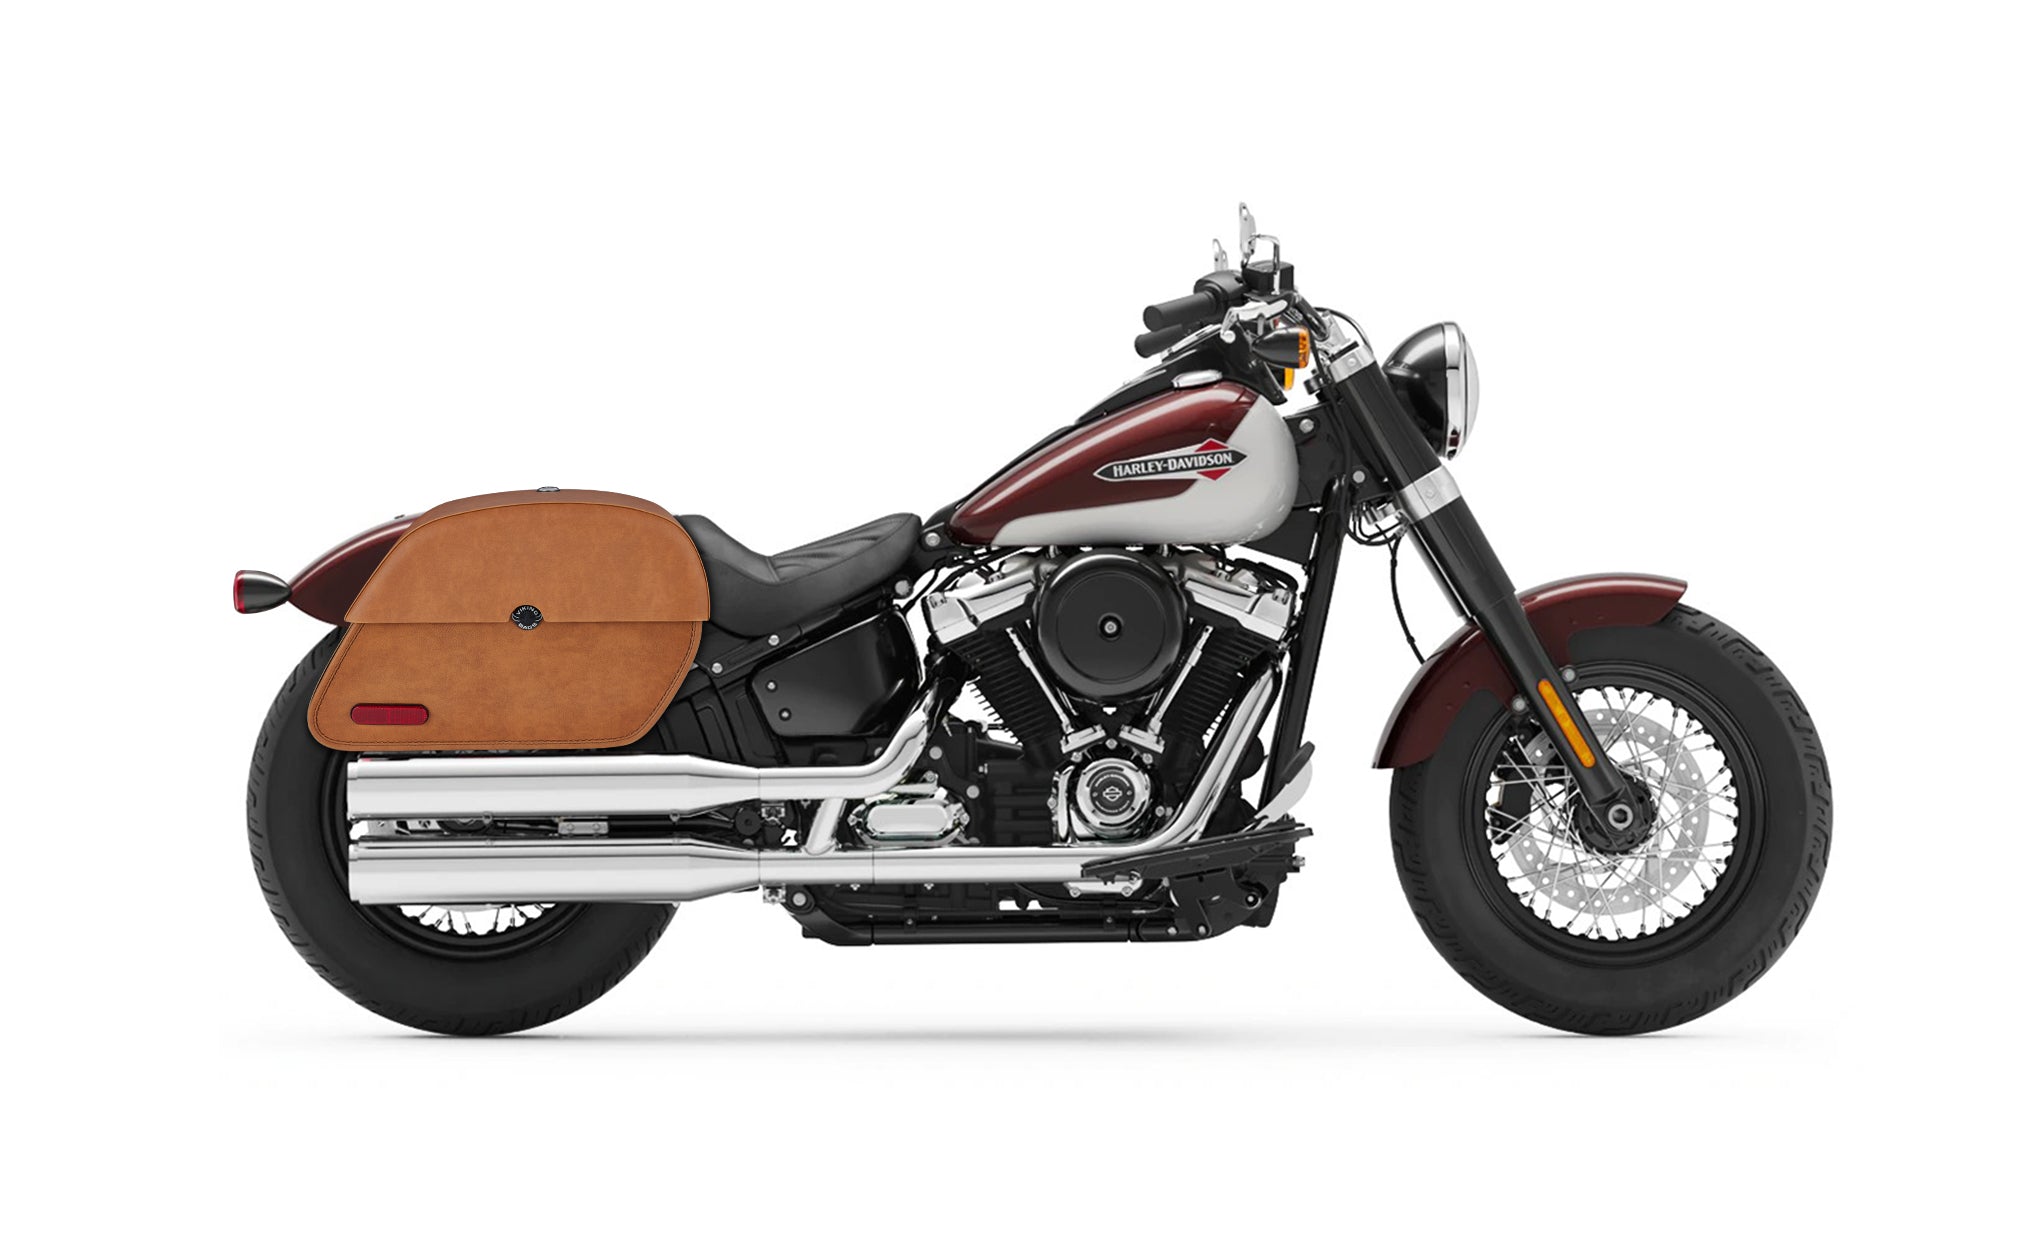 33L - Panzer Brown Large Leather Motorcycle Saddlebags for Harley Softail Slim FLSL on Bike Photo @expand